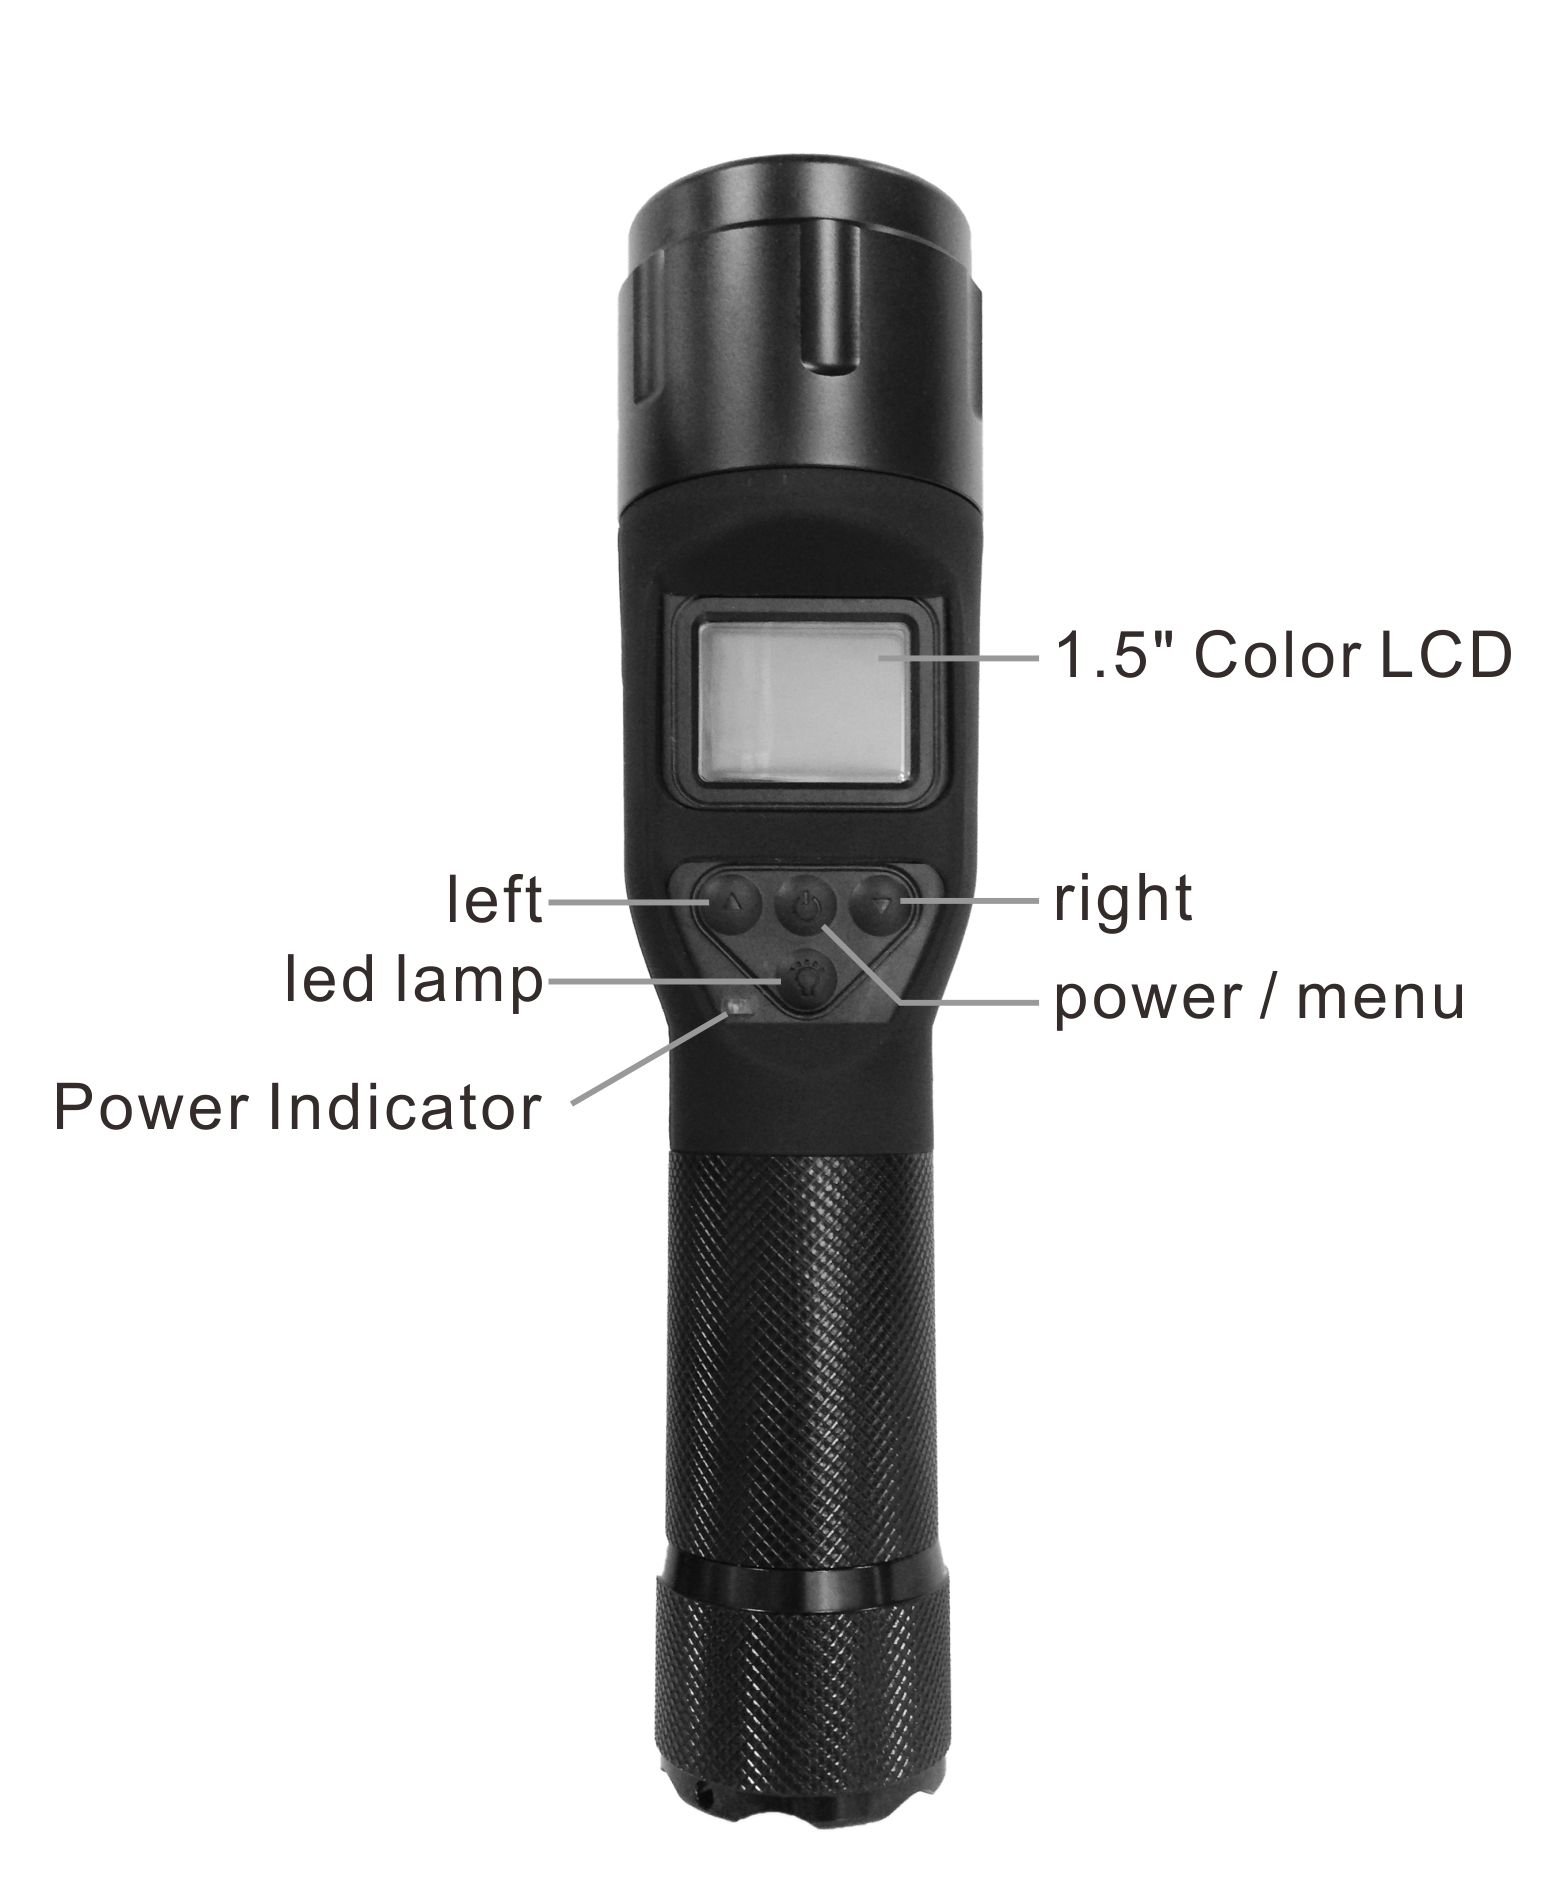 Vividia Waterproof LED Flashlight DVR Inspection Camera with Photo/Video/Audio Recordable Capability and 1.5” LCD Monitor